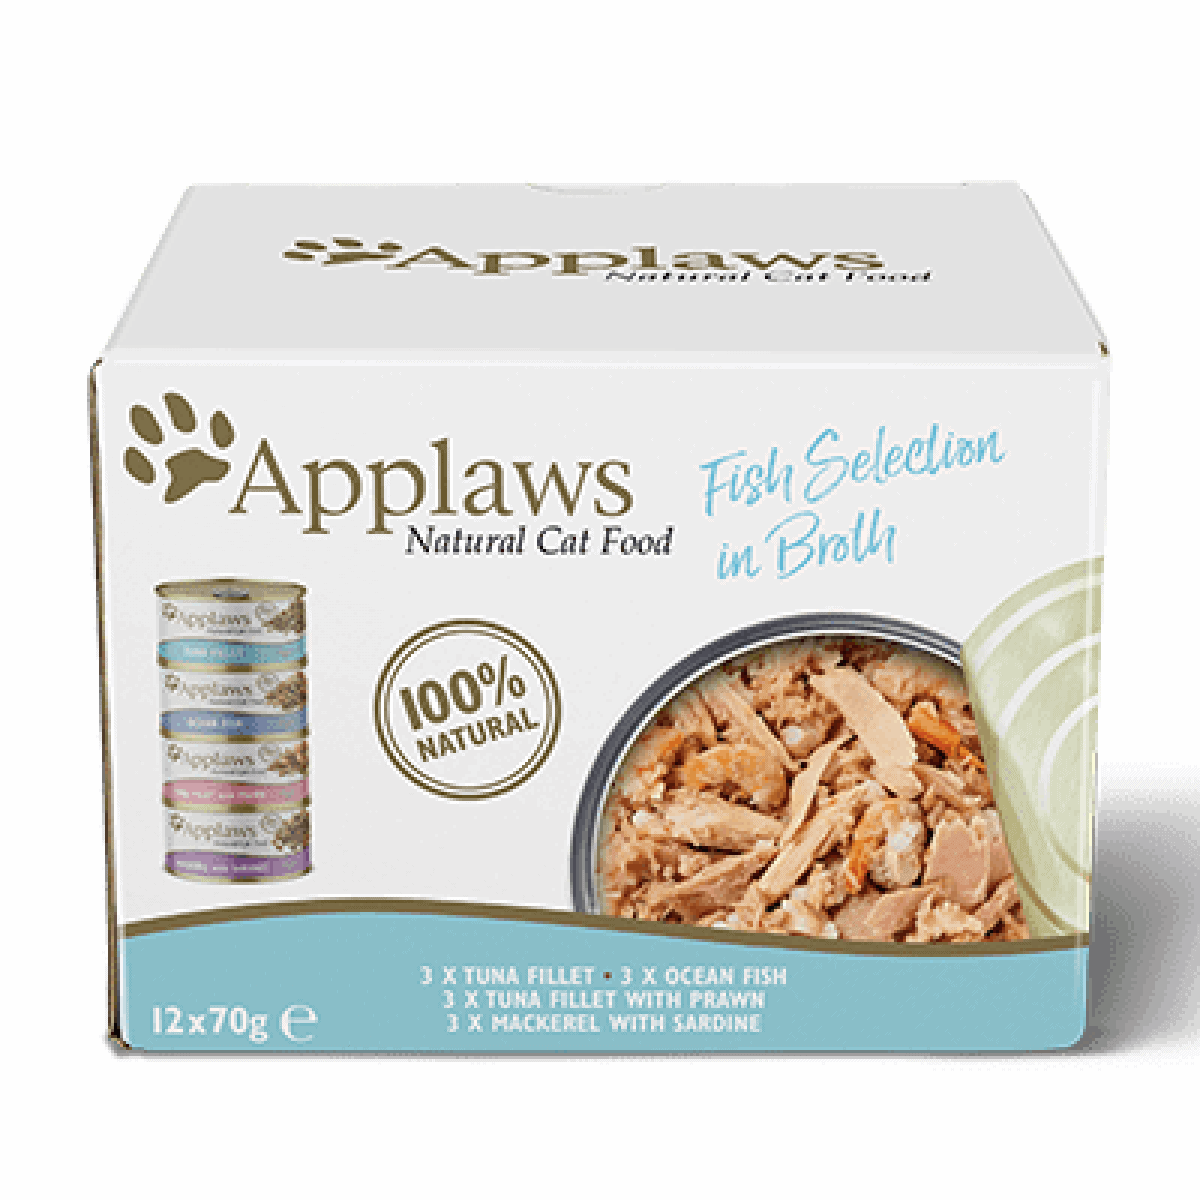 Applaws Fish Selection in Broth 12 x 70g – Pawfect Supplies Ltd Product Image